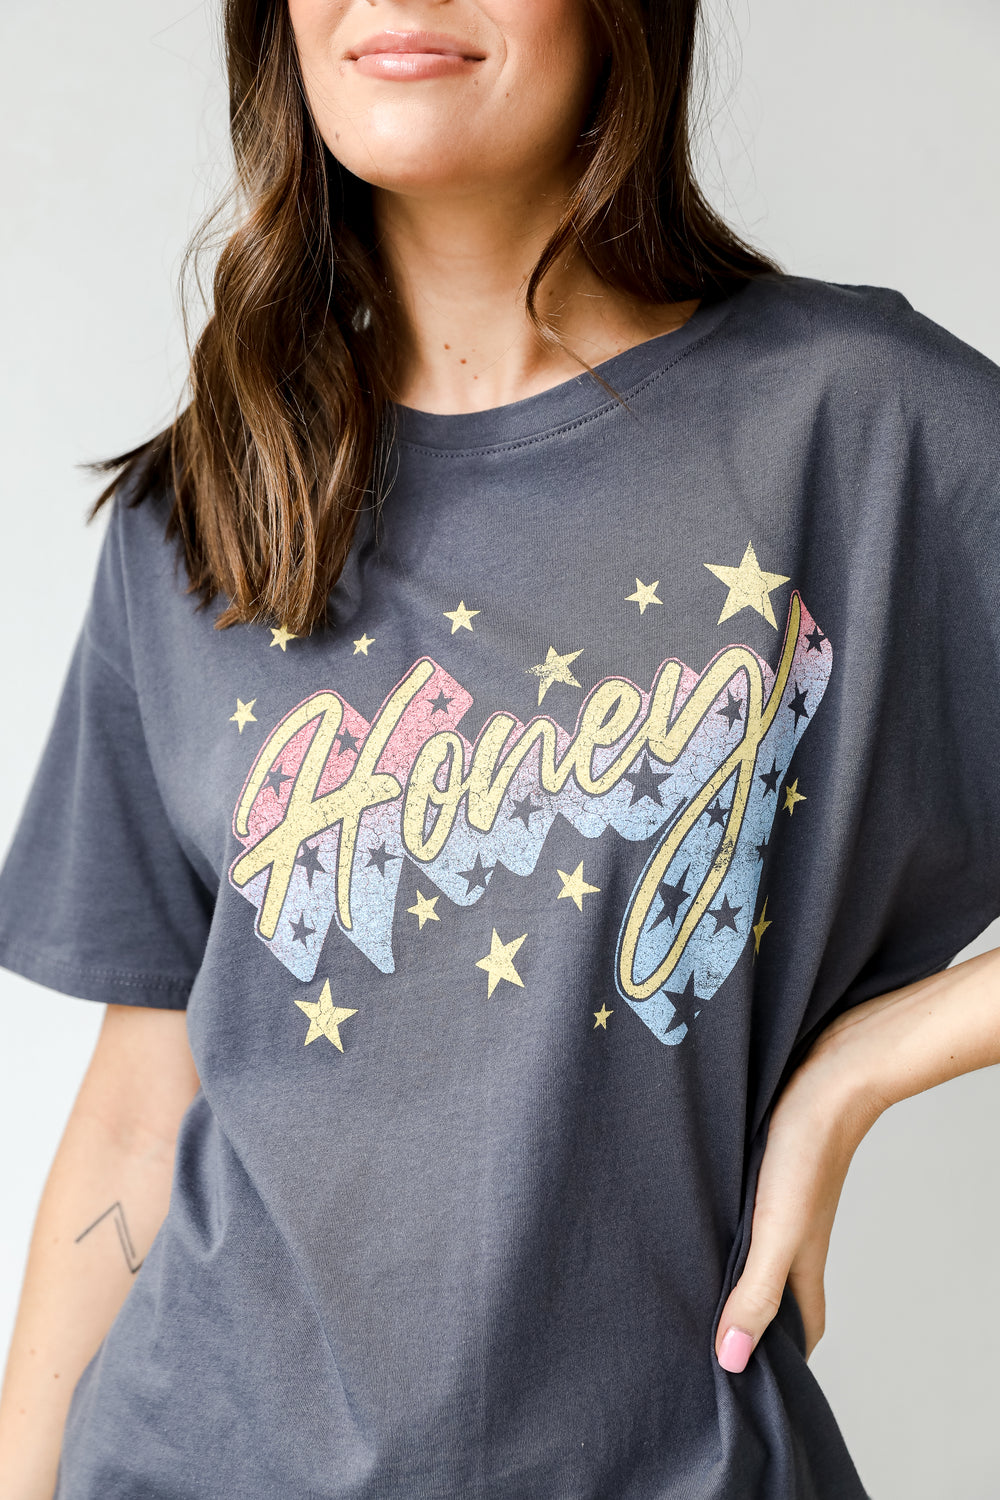 Honey Star Graphic Tee from dress up